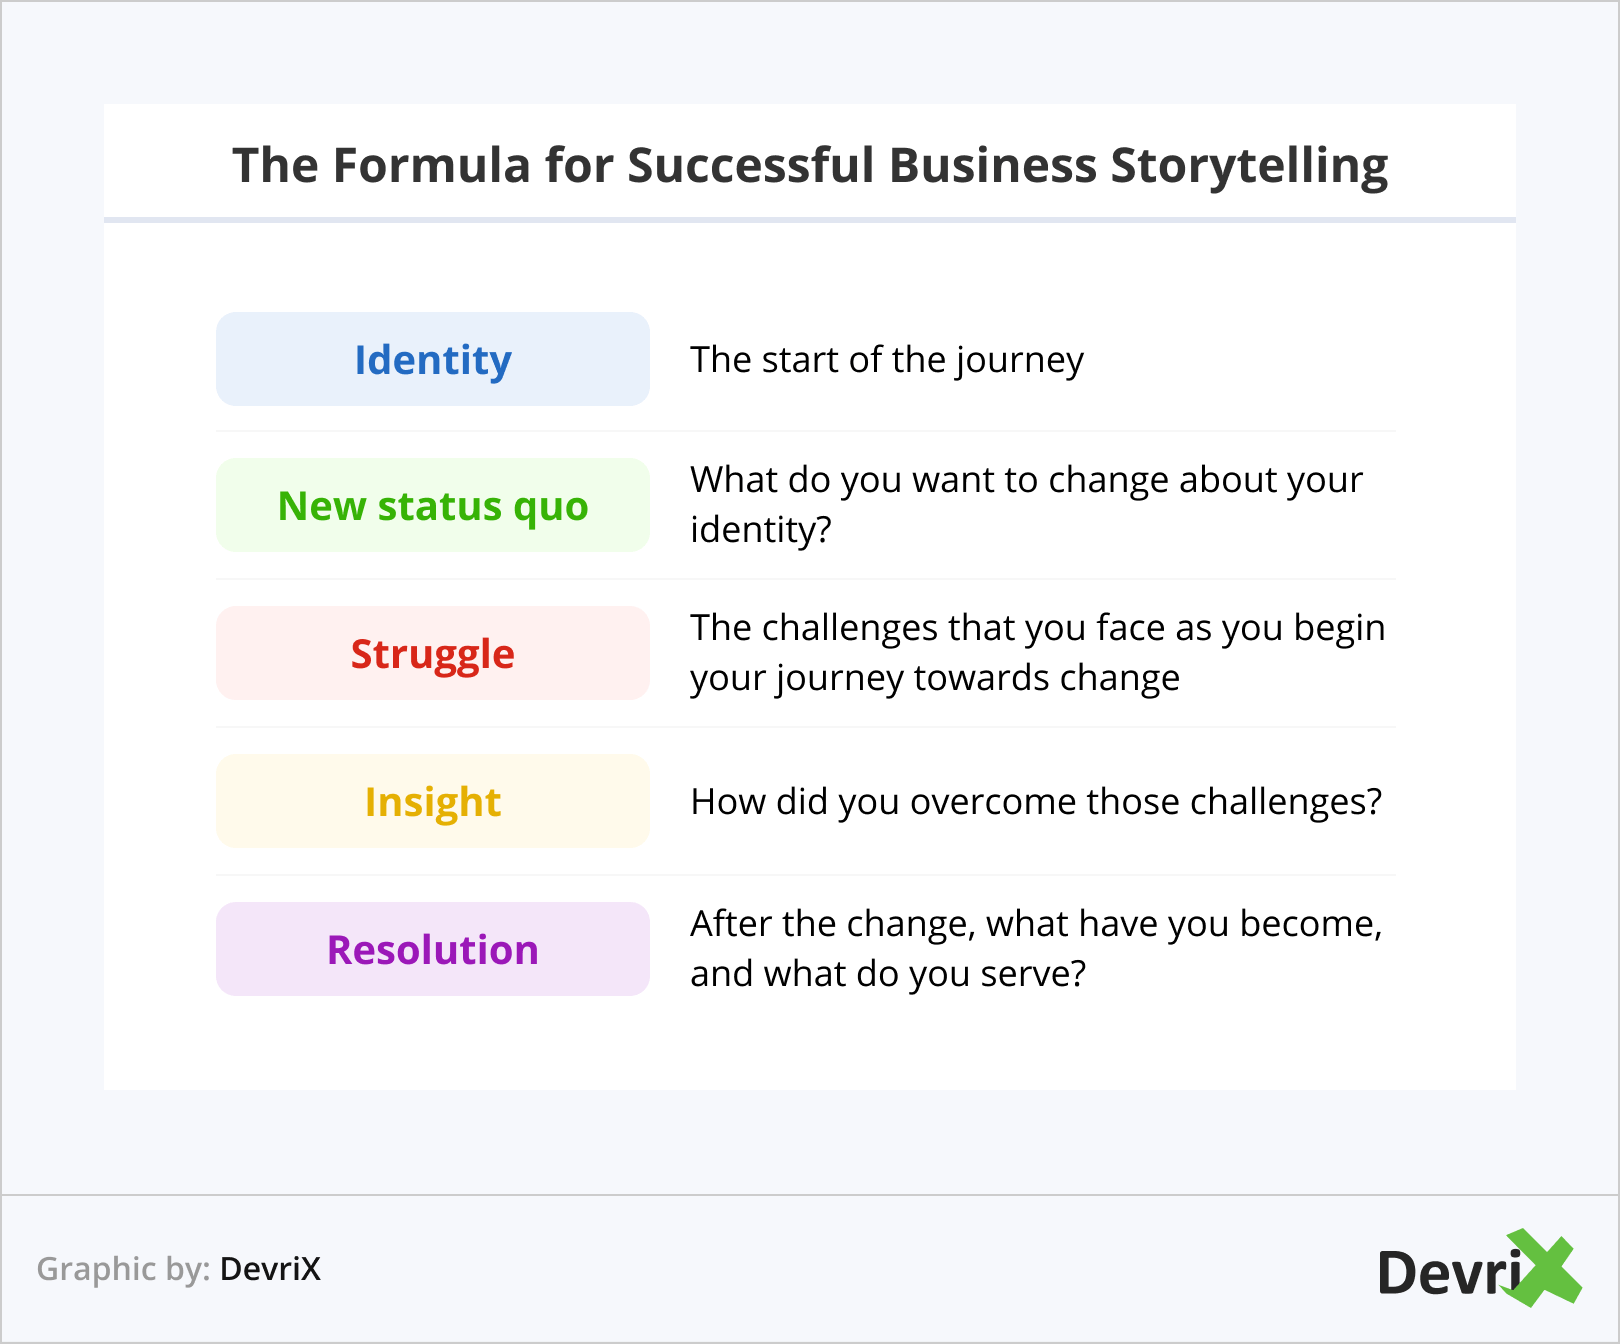 The Formula for Successful Business Storytelling